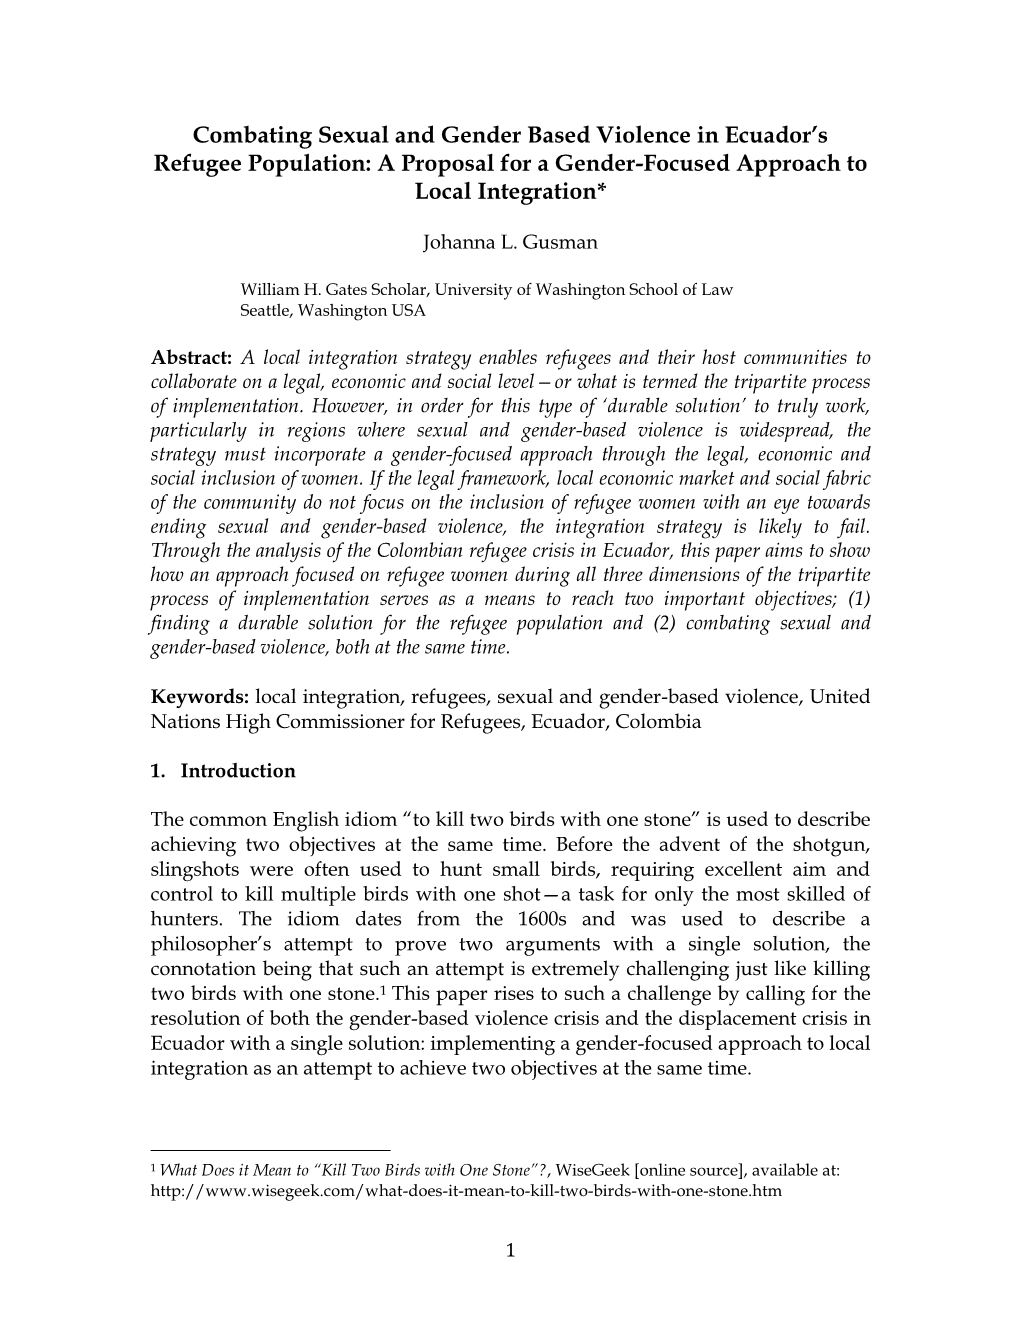 Combating Sexual and Gender Based Violence in Ecuador’S Refugee Population: a Proposal for a Gender-Focused Approach to Local Integration*